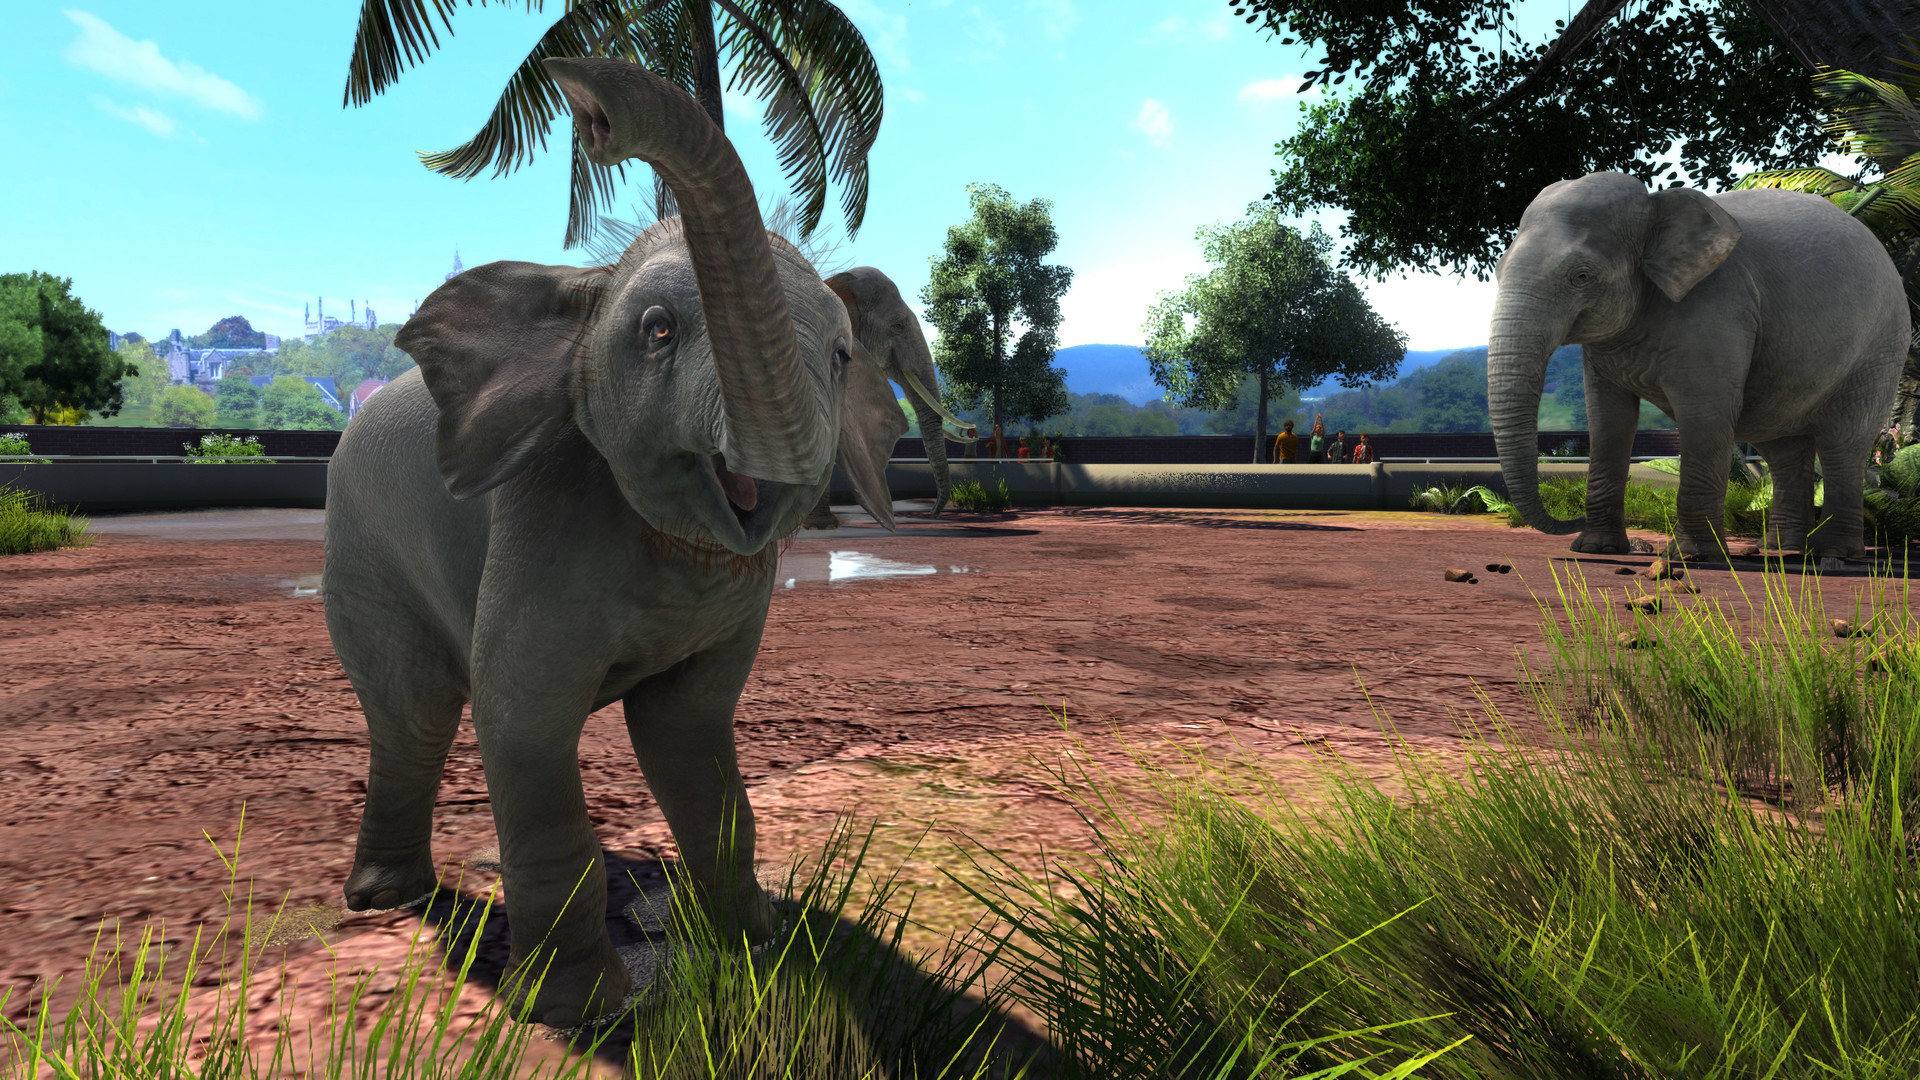 buy zoo tycoon complete collection digital download